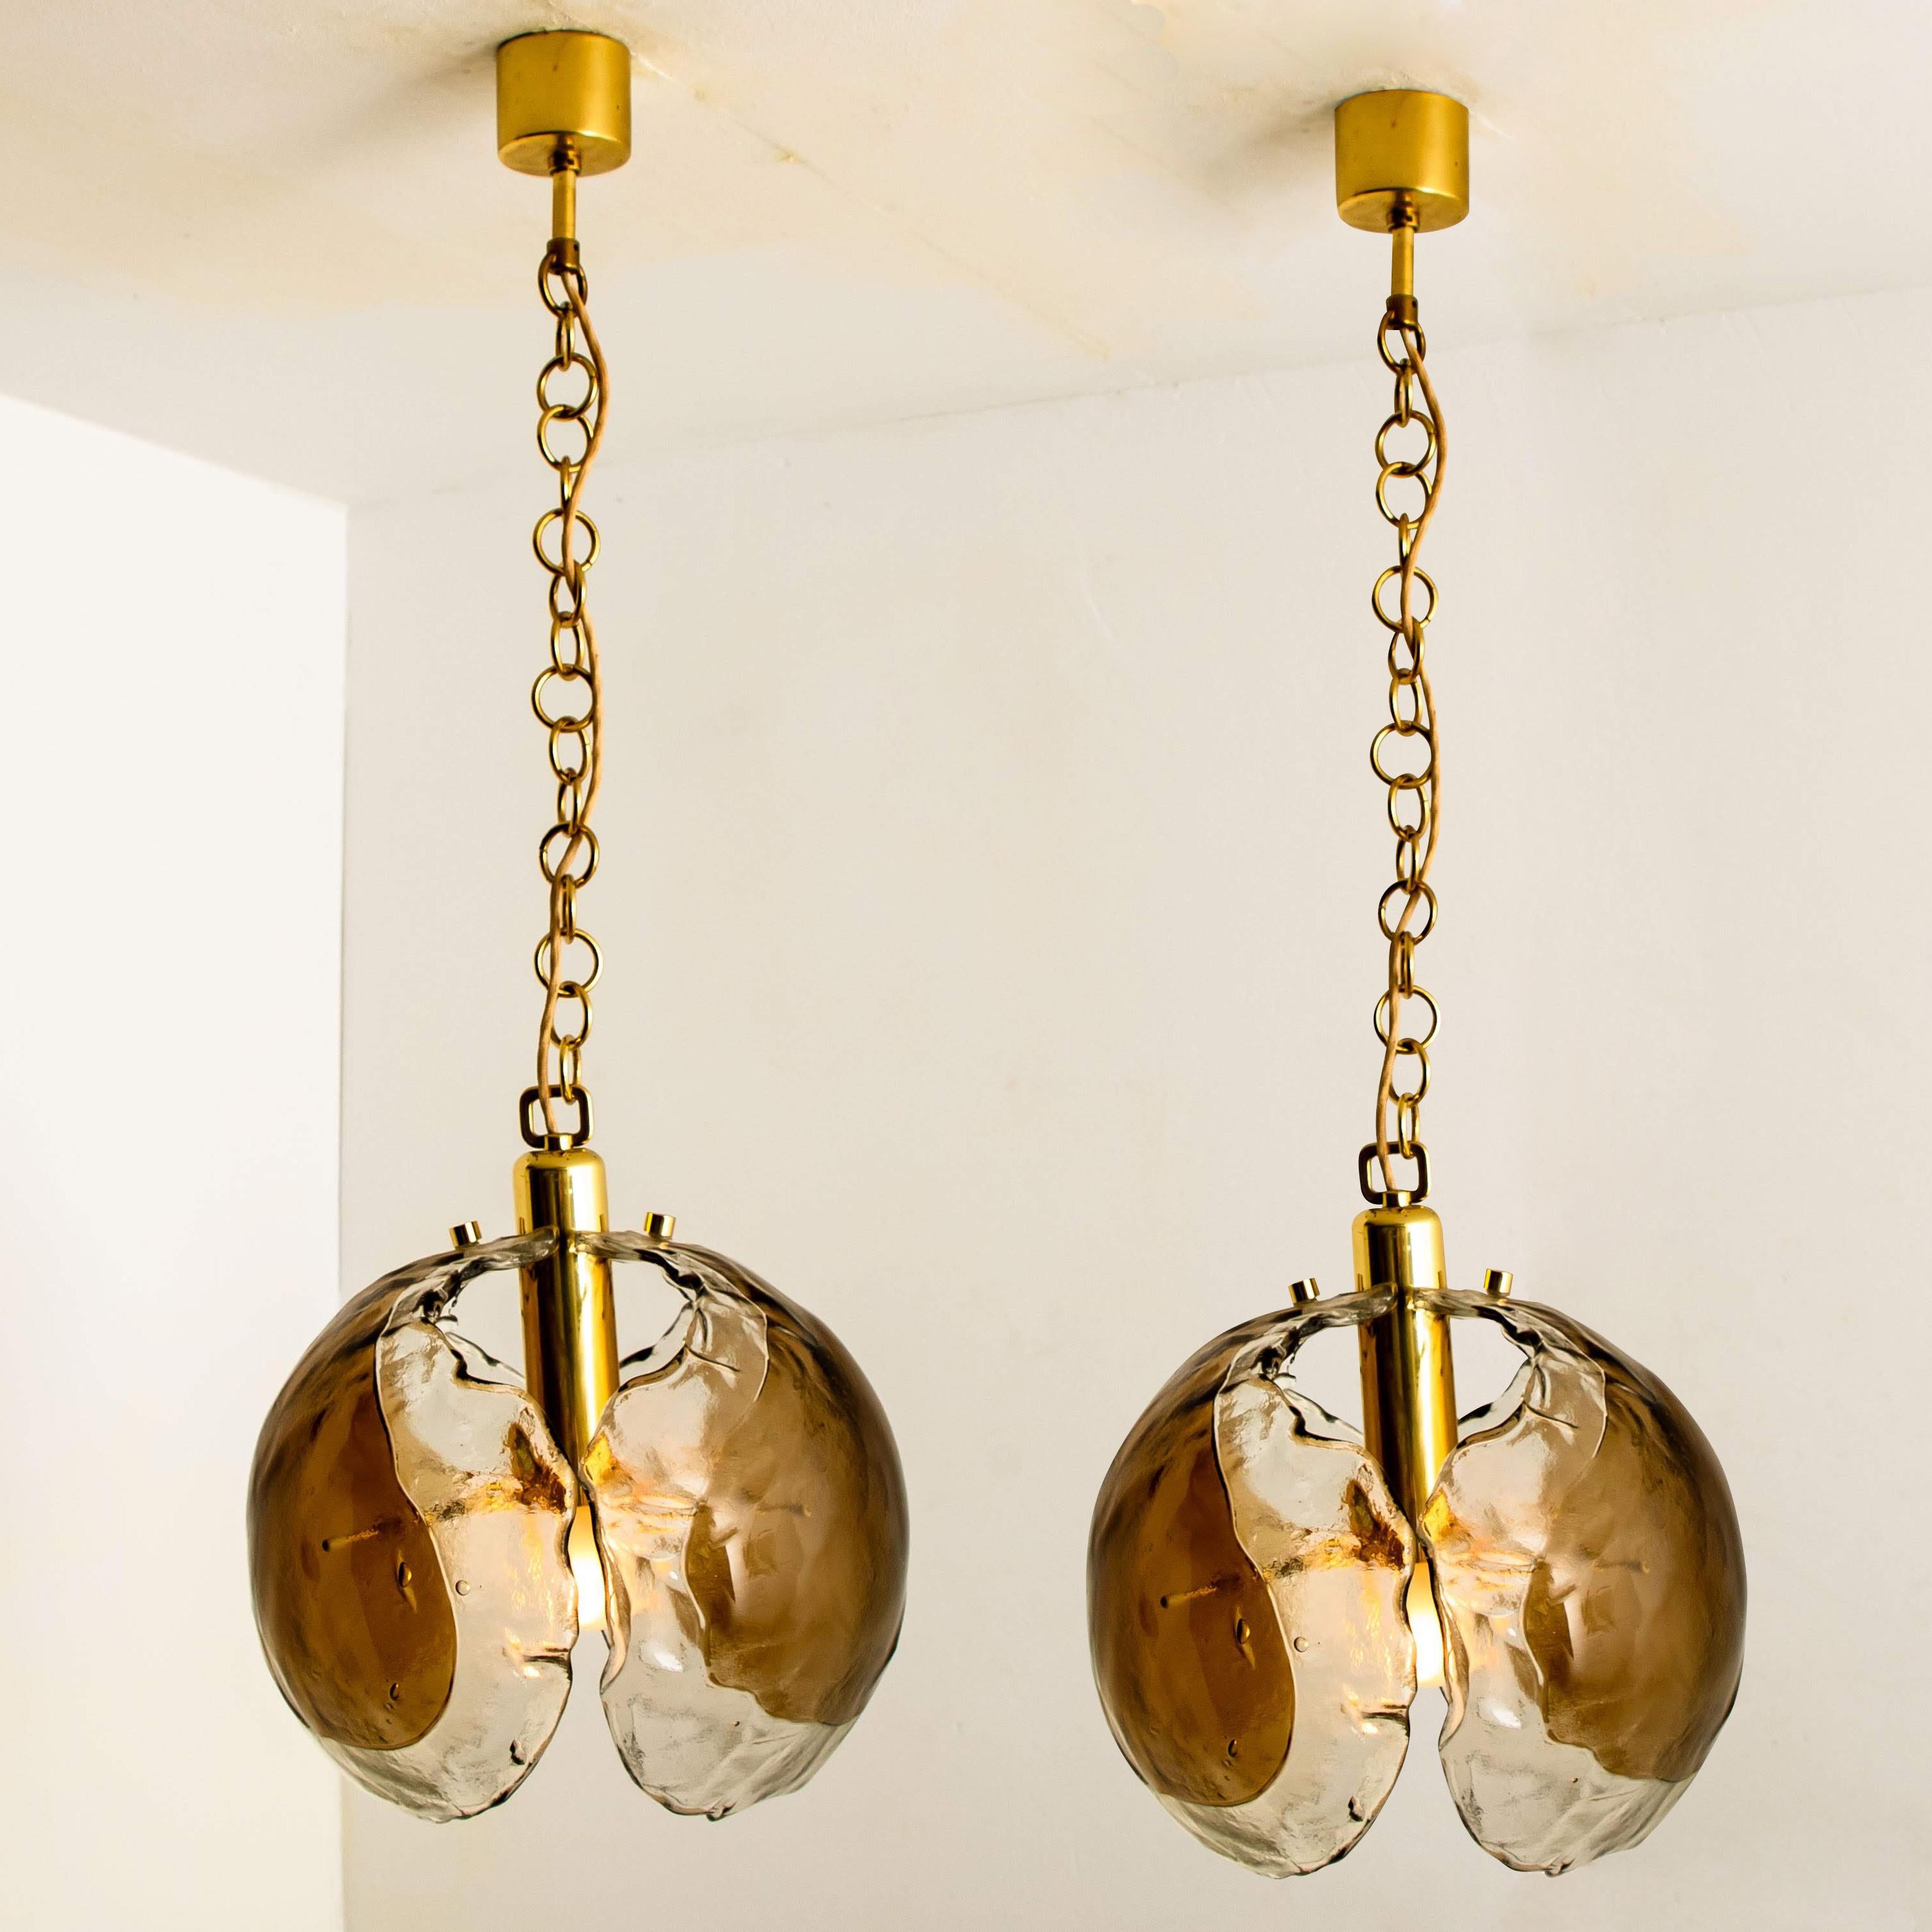 Mid-Century Modern 1 of the 3 Kalmar Chandelier Pendant Lights, Smoked Glass and Brass, 1970s For Sale